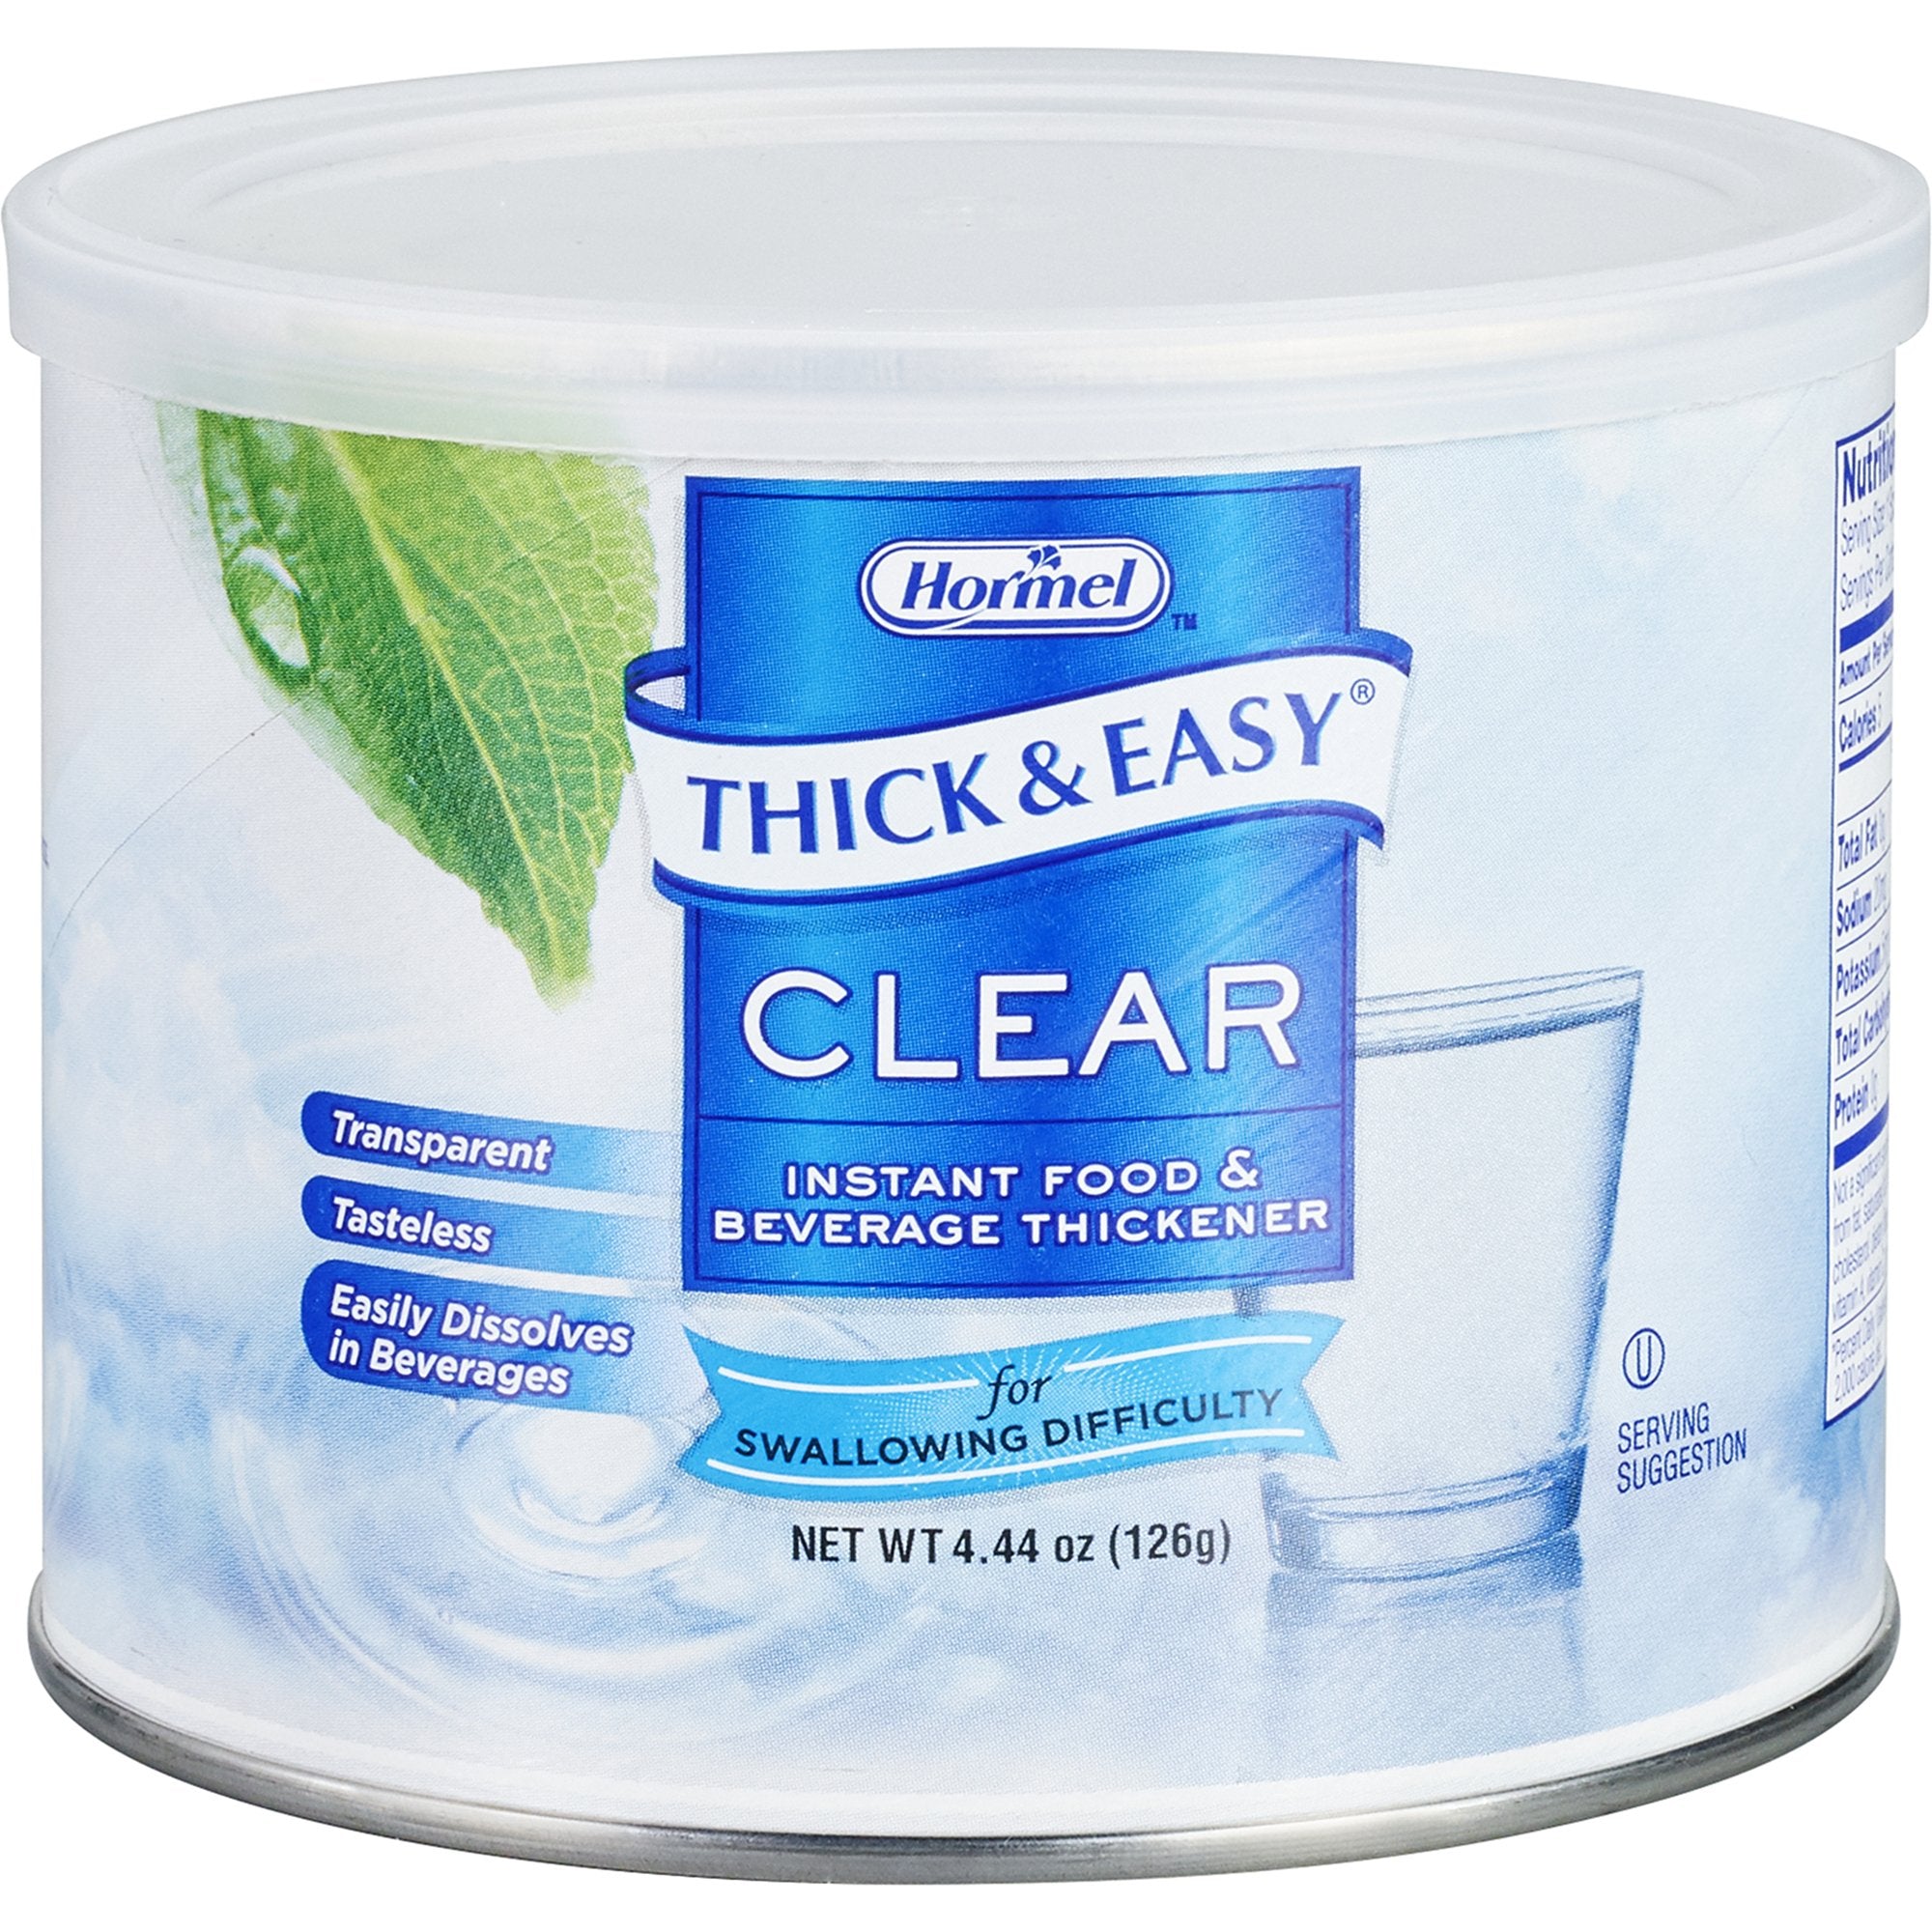 Food and Beverage Thickener Thick & Easy Clear 4.4 oz. Canister Unflavored Powder IDDSI Level 2 Mildly Thick